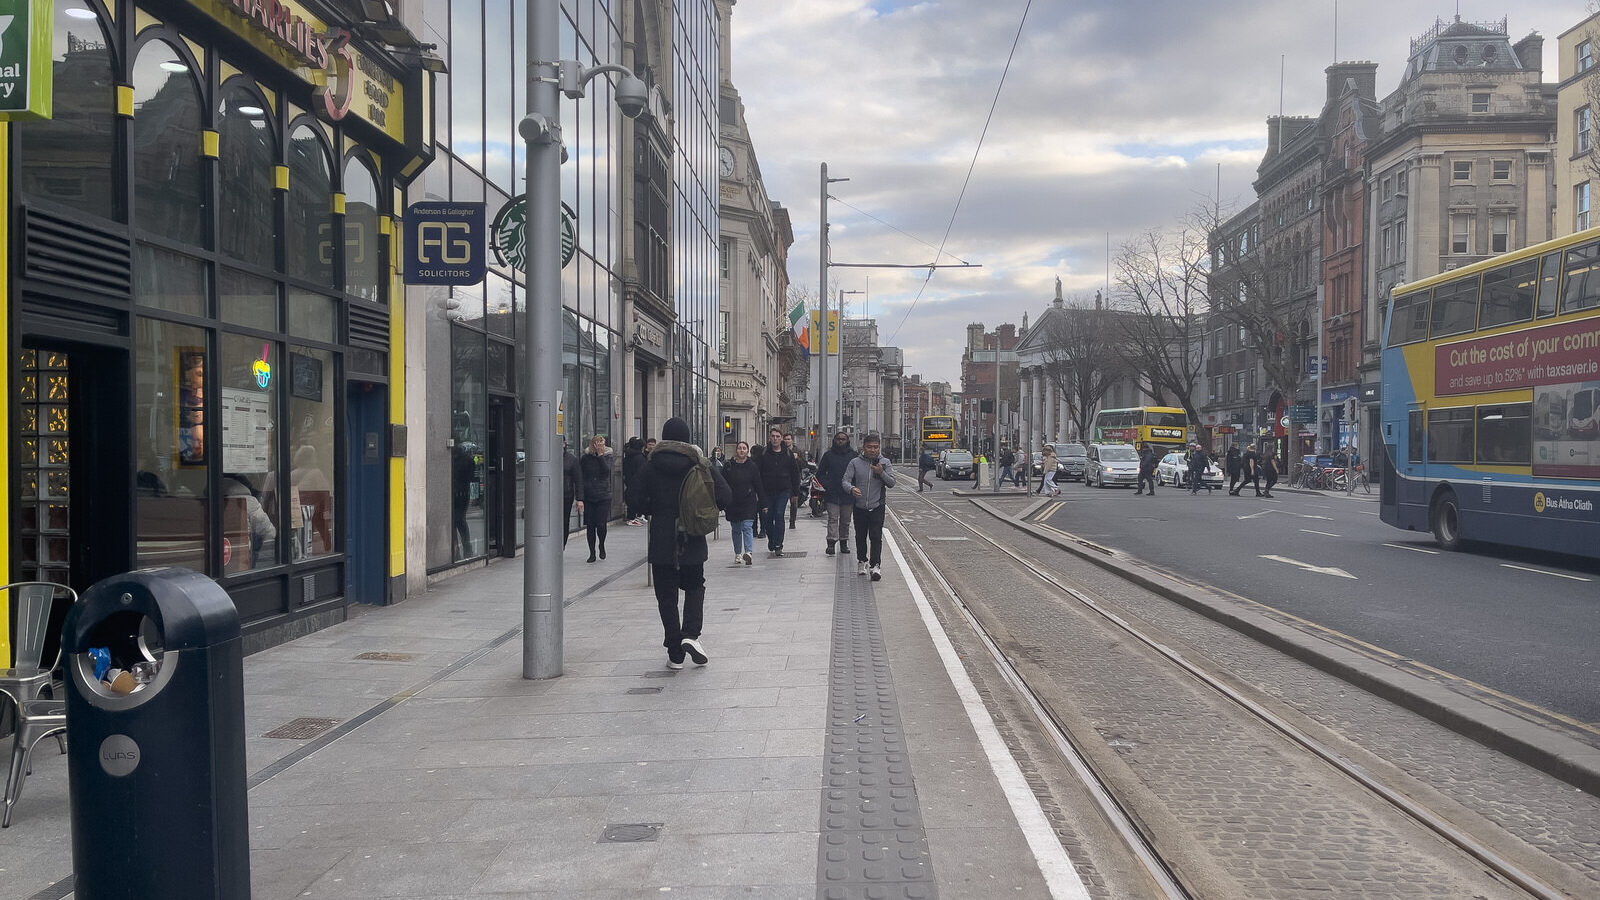 WESTMORELAND STREET IN DUBLIN [NAMED AFTER JOHN FANE THE 10th EARL OF WESTMORELAND]-229562-1